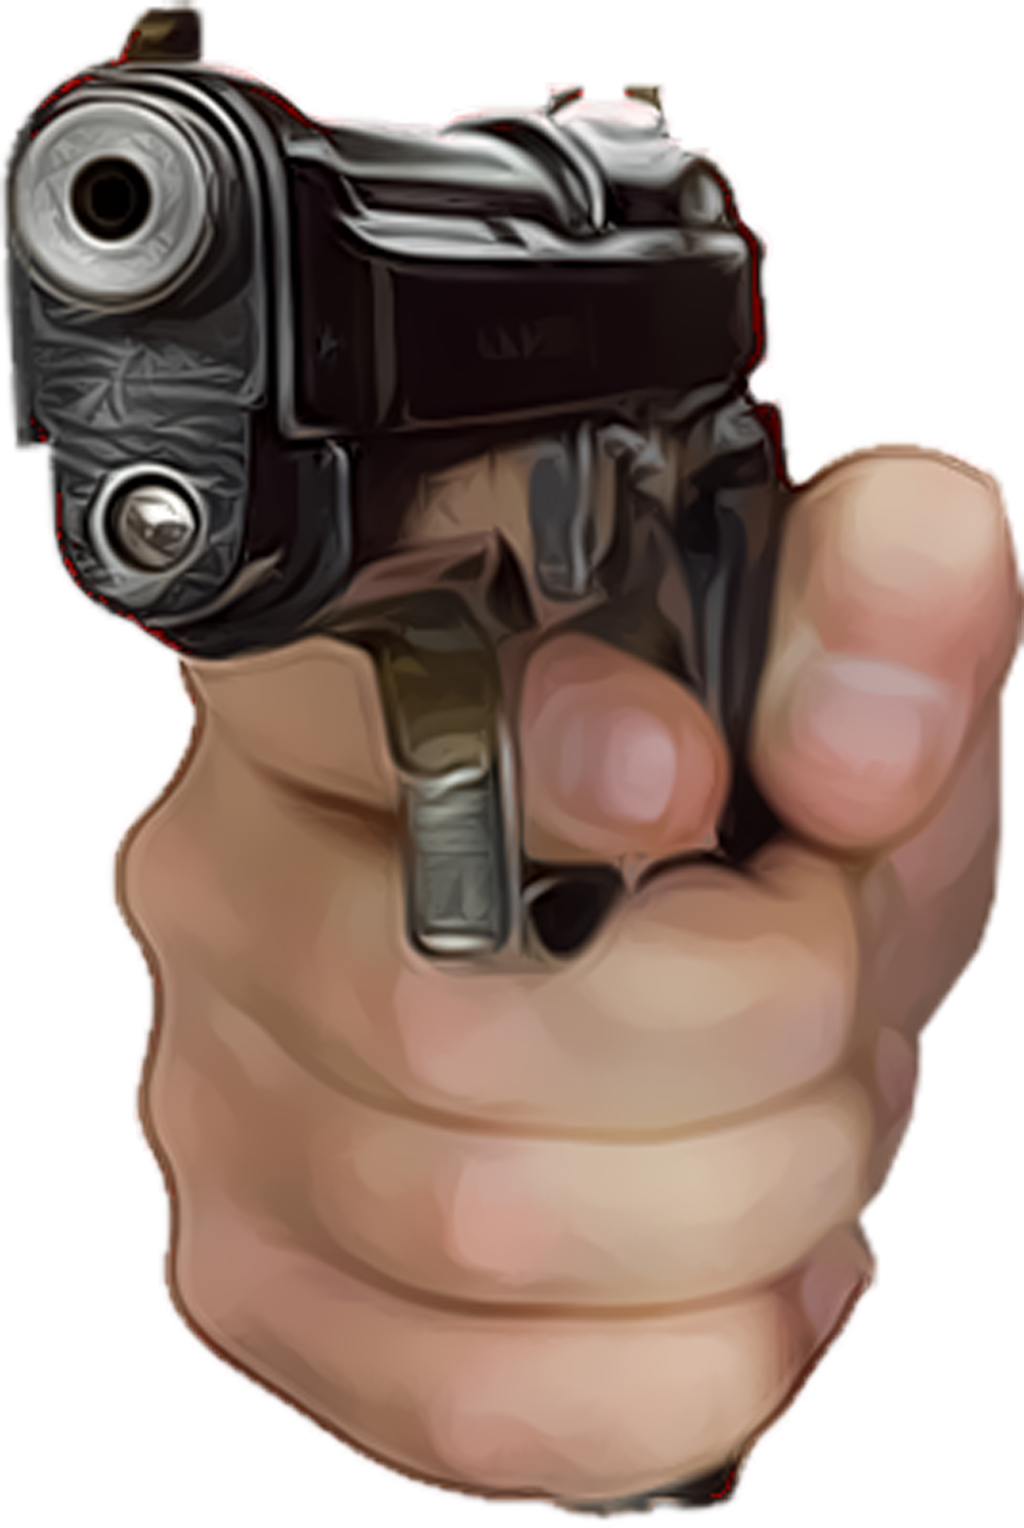 Hand With Gun Png Png Image Collection